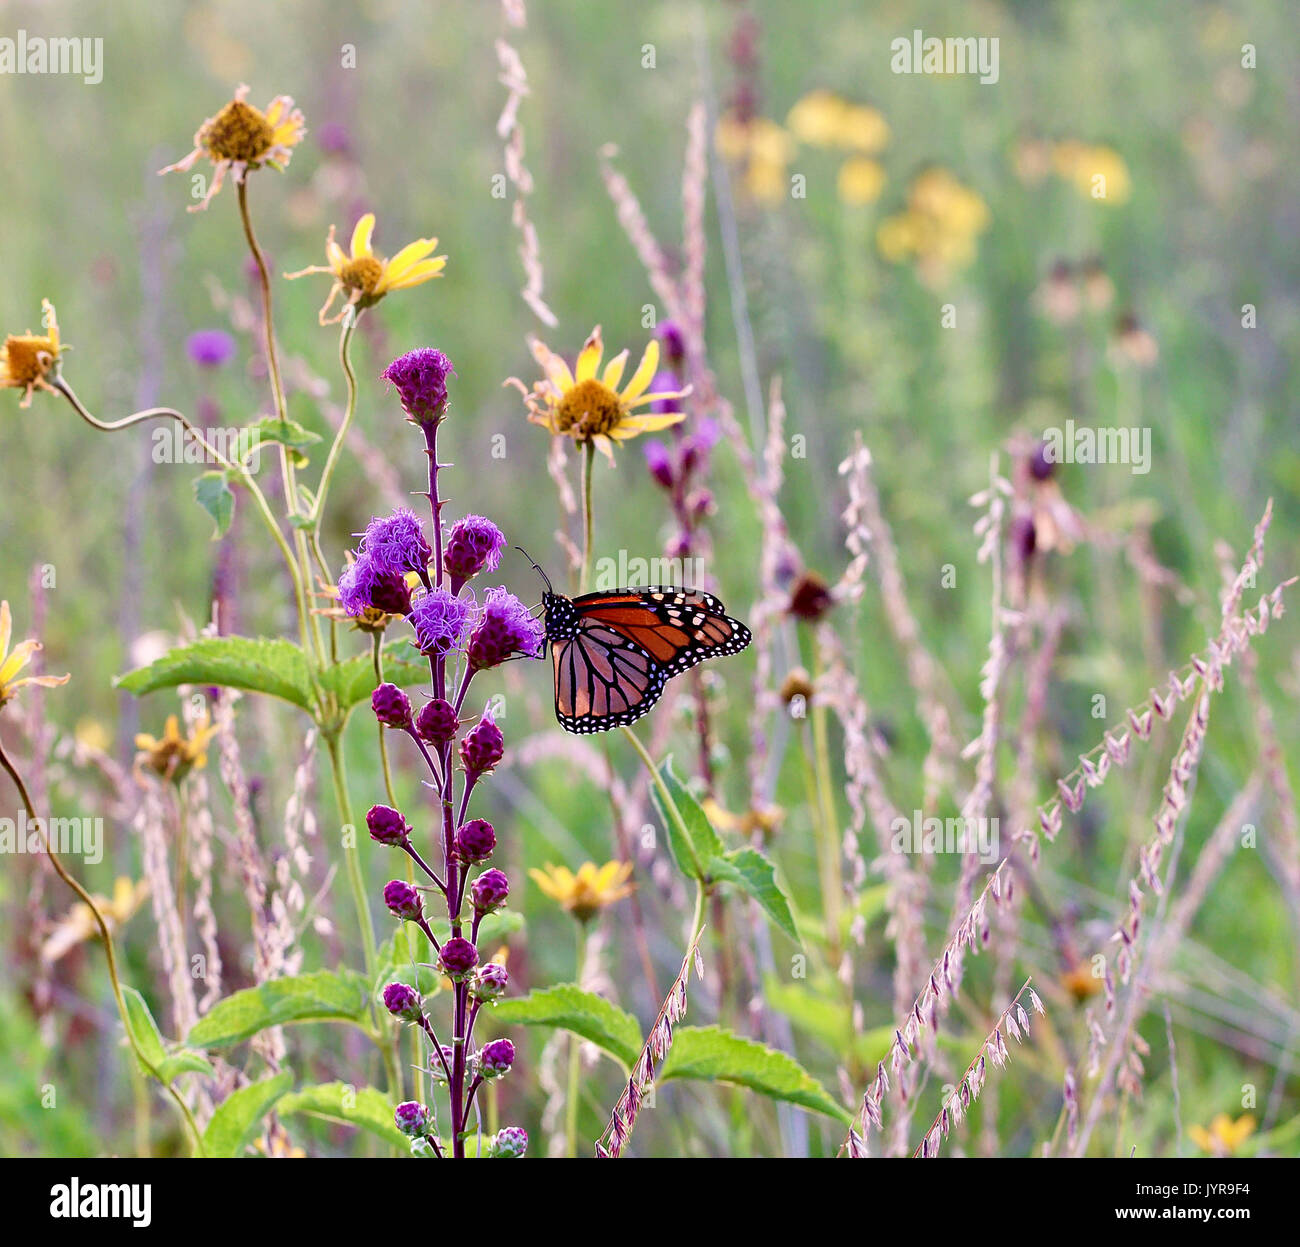 Colorful monarch butterfly on a purple flower Stock Photo